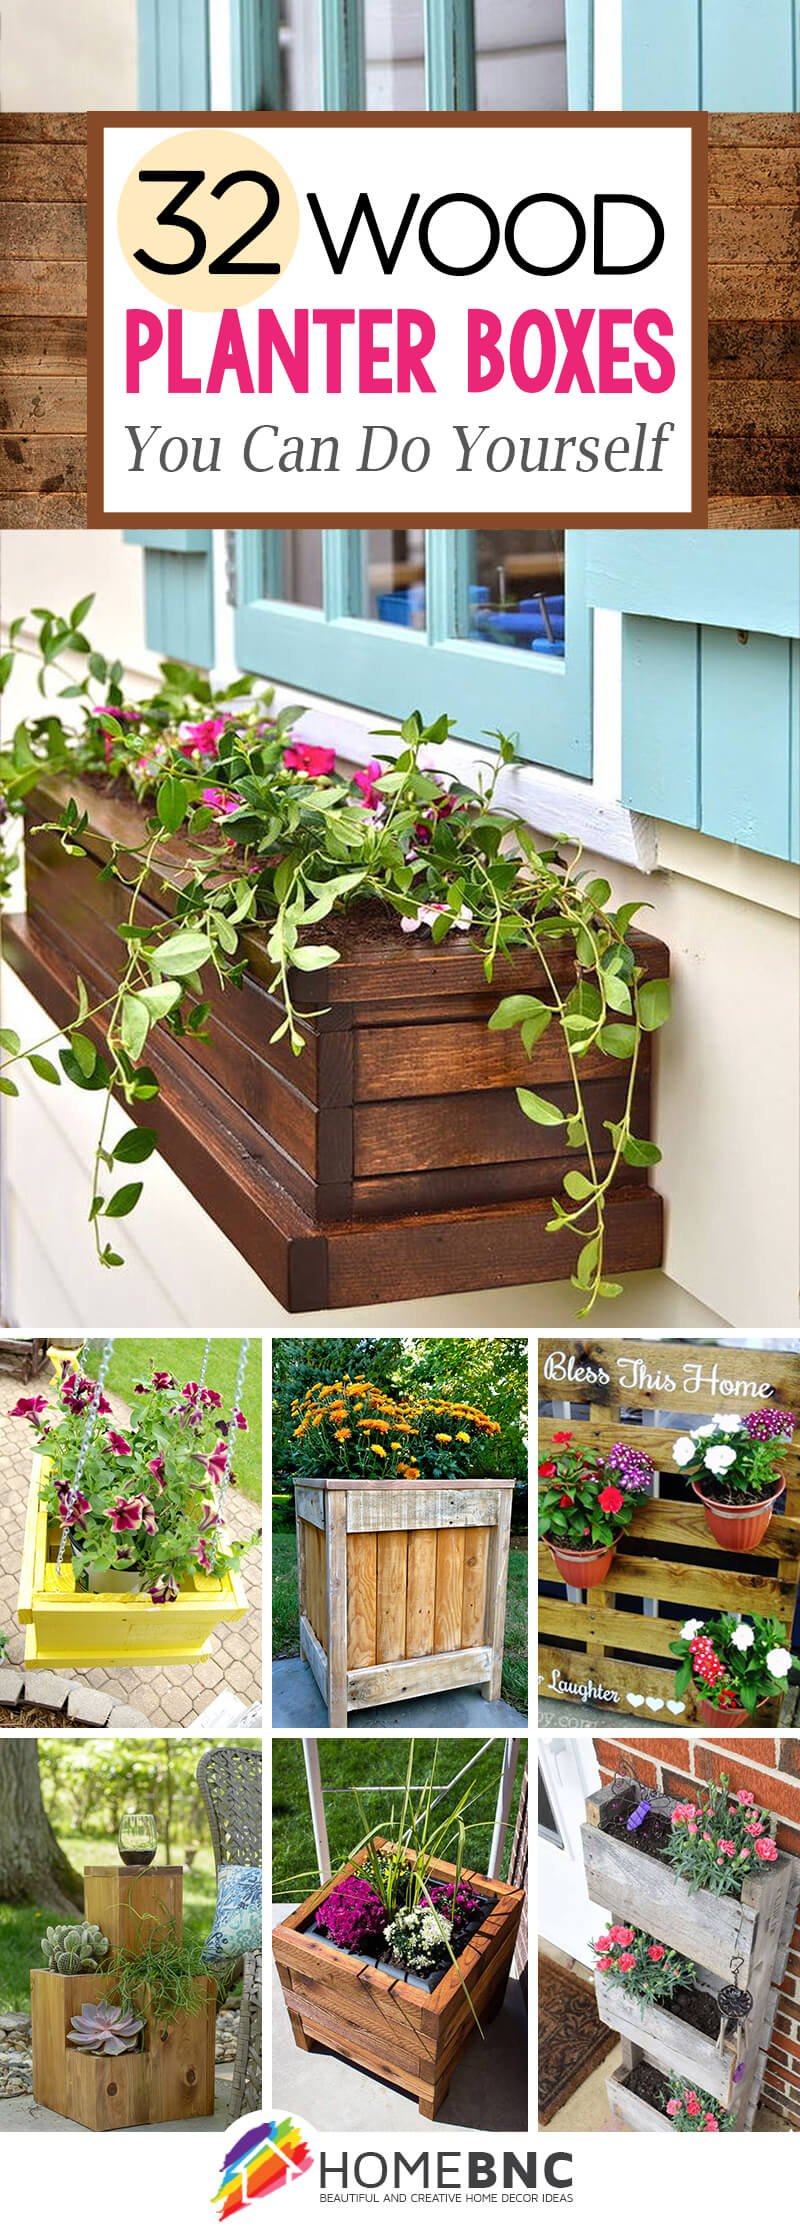 Diy Pallet And Wood Planter Box Ideas, How To Make Wooden Containers For Plants